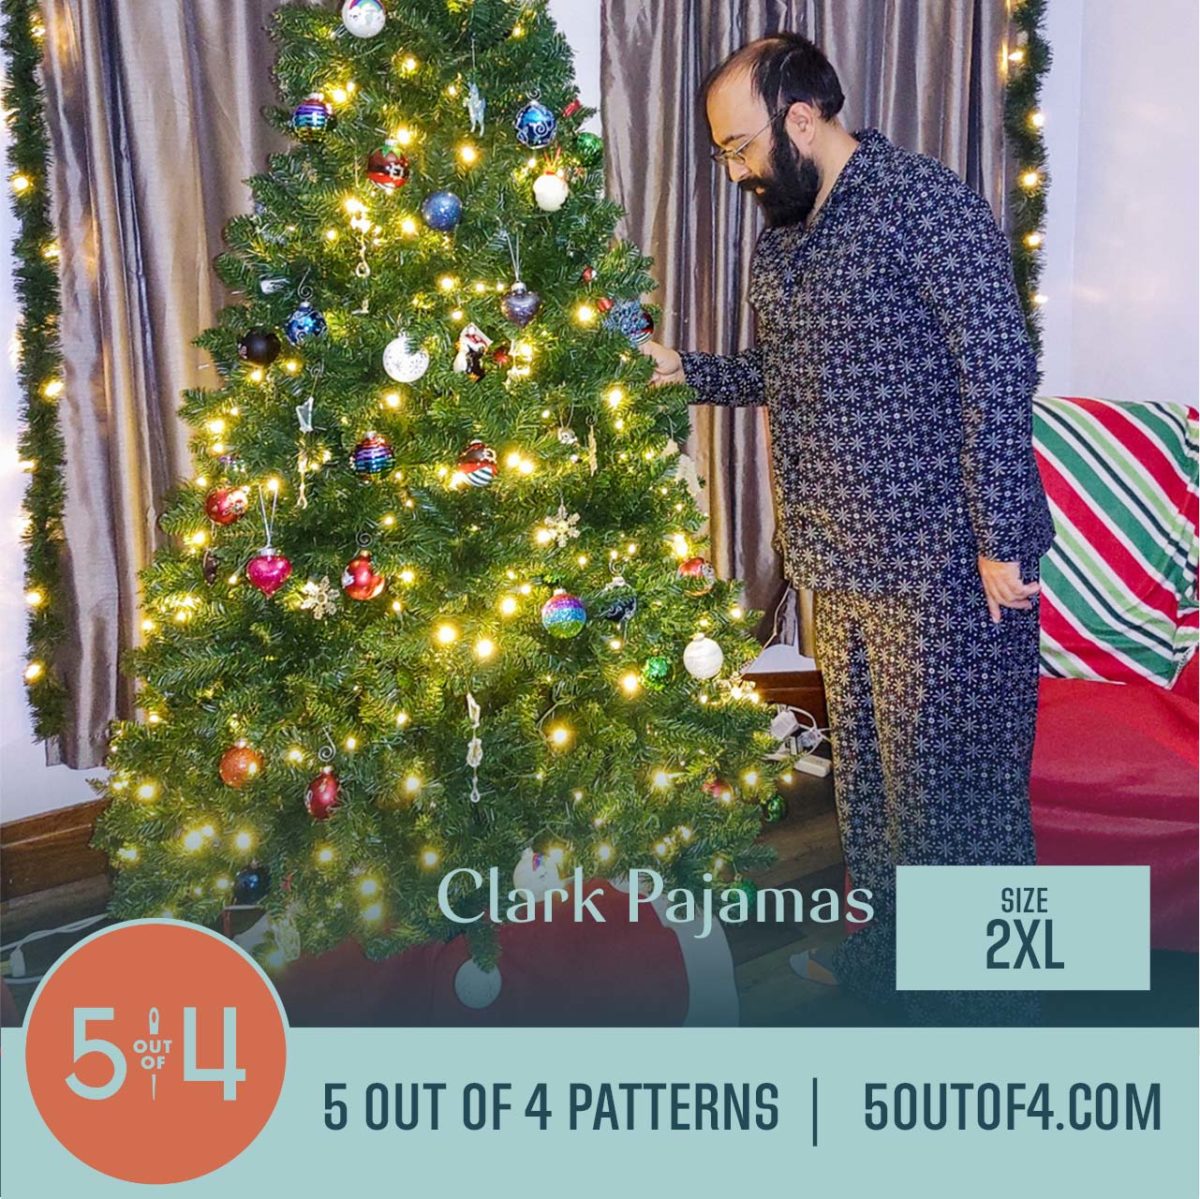 5oo4 Woven Pajama Pattern for Men size 2XL